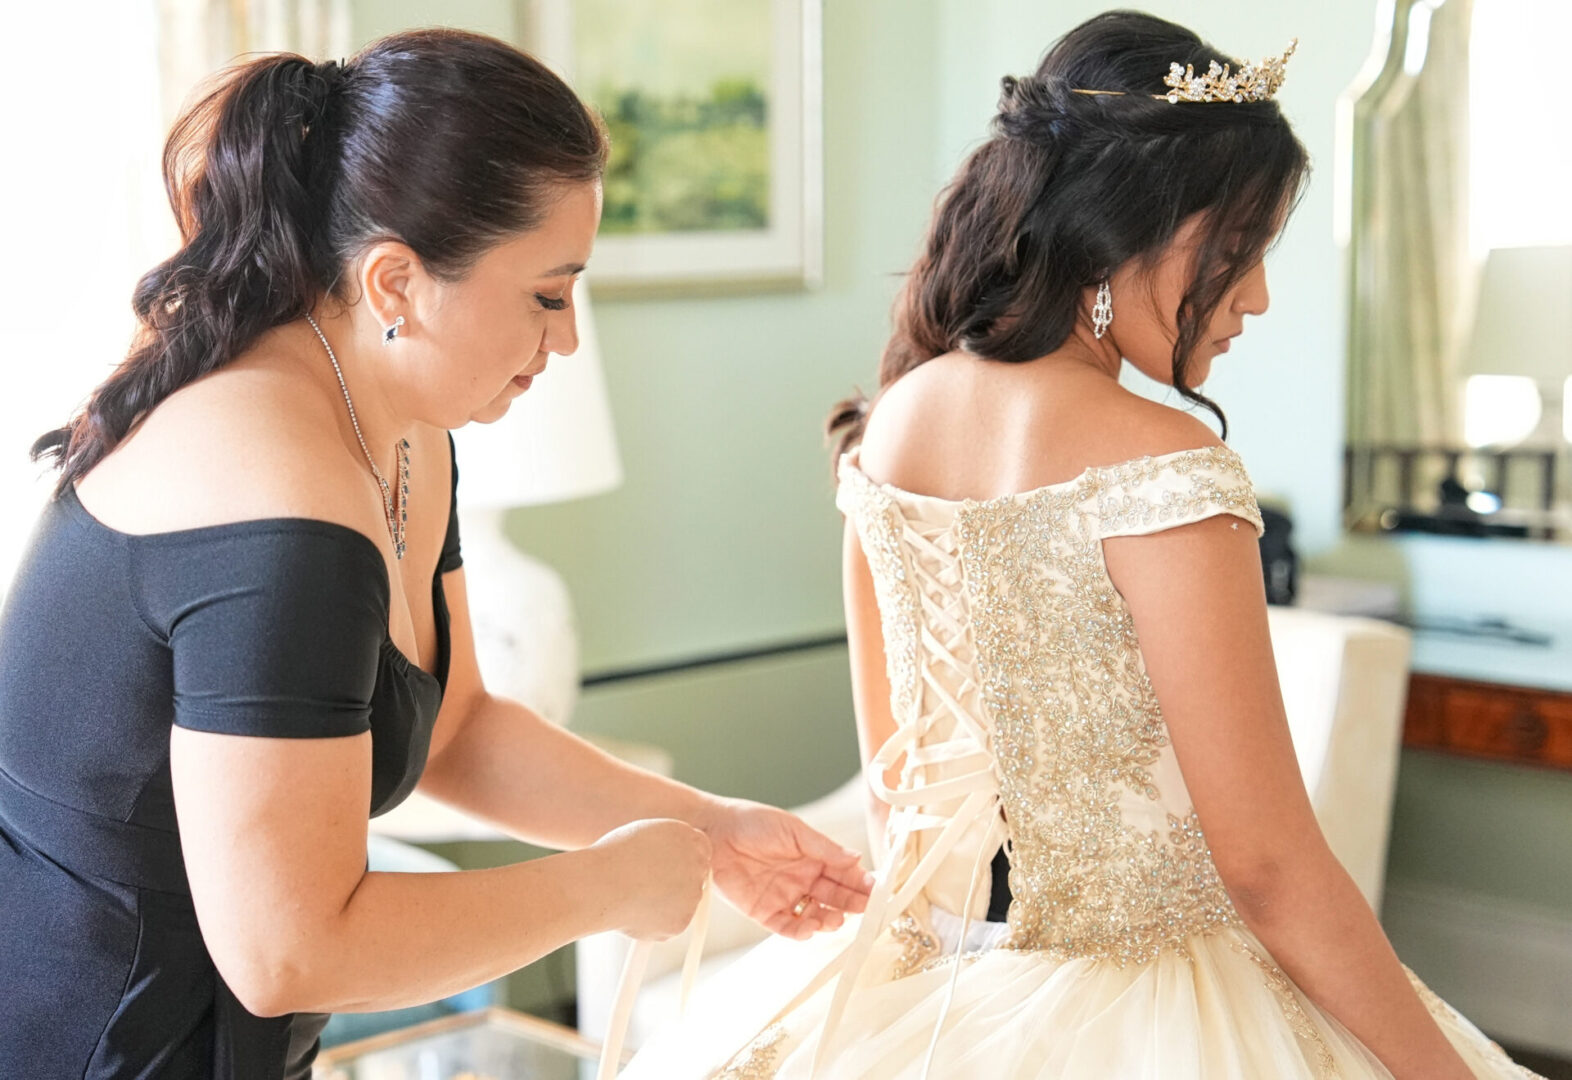 A woman helping another girl put on her dress.